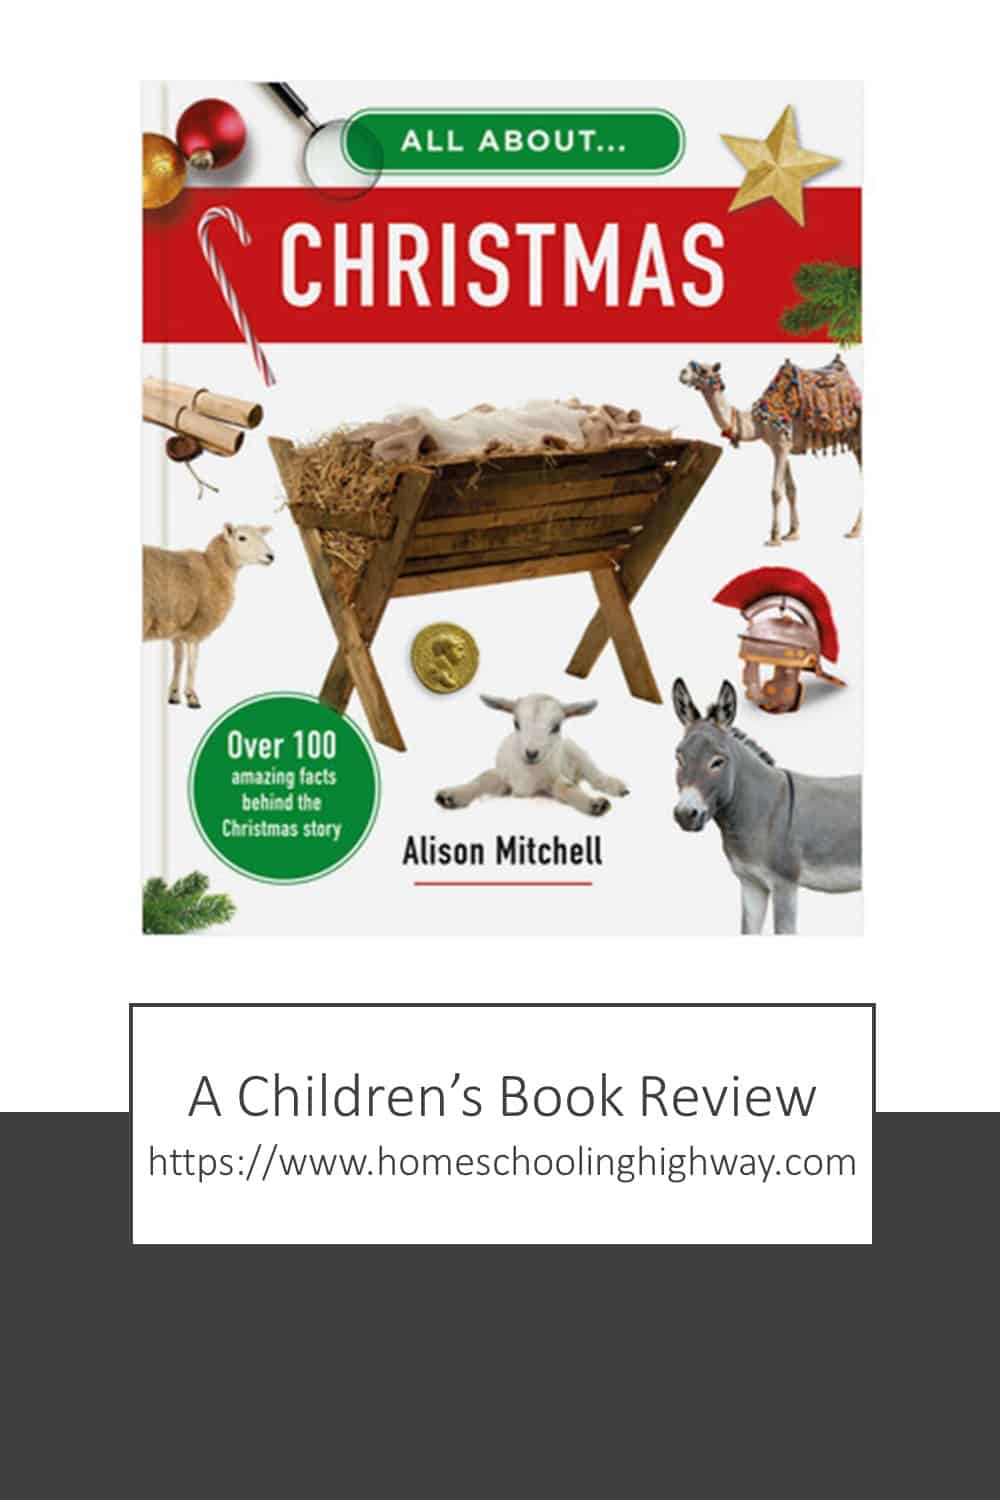 All About Christmas written by Alison Mitchell. Book reviewed by Homeschooling Highway